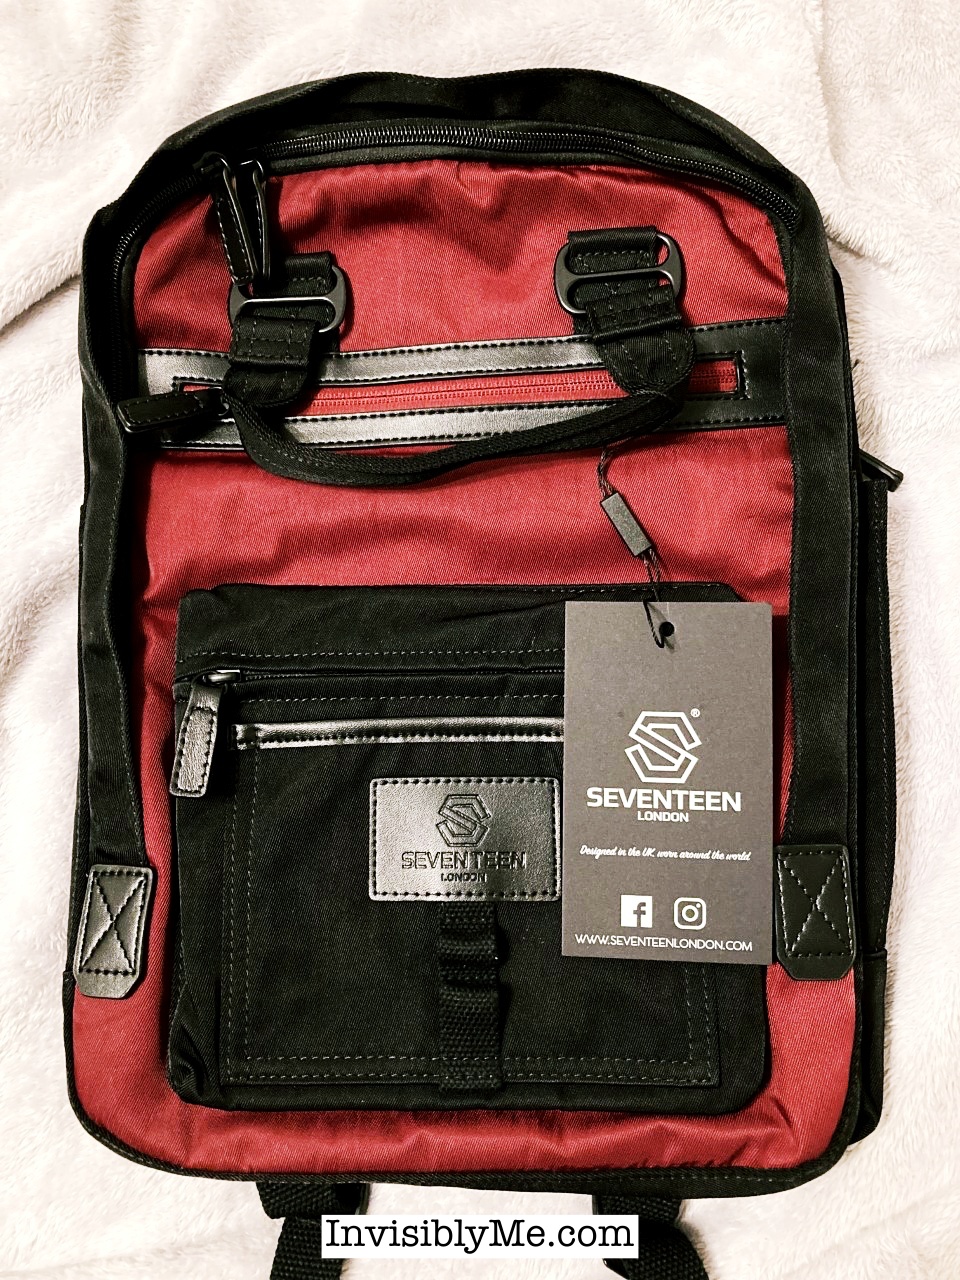 A photo of the Wimbledon backpack from Seventeen London. This is the replacement for the Camden featured in this review. It has a black surround and detailing with a large front pocket, handles and a deep red front. It looks neat and stylish.